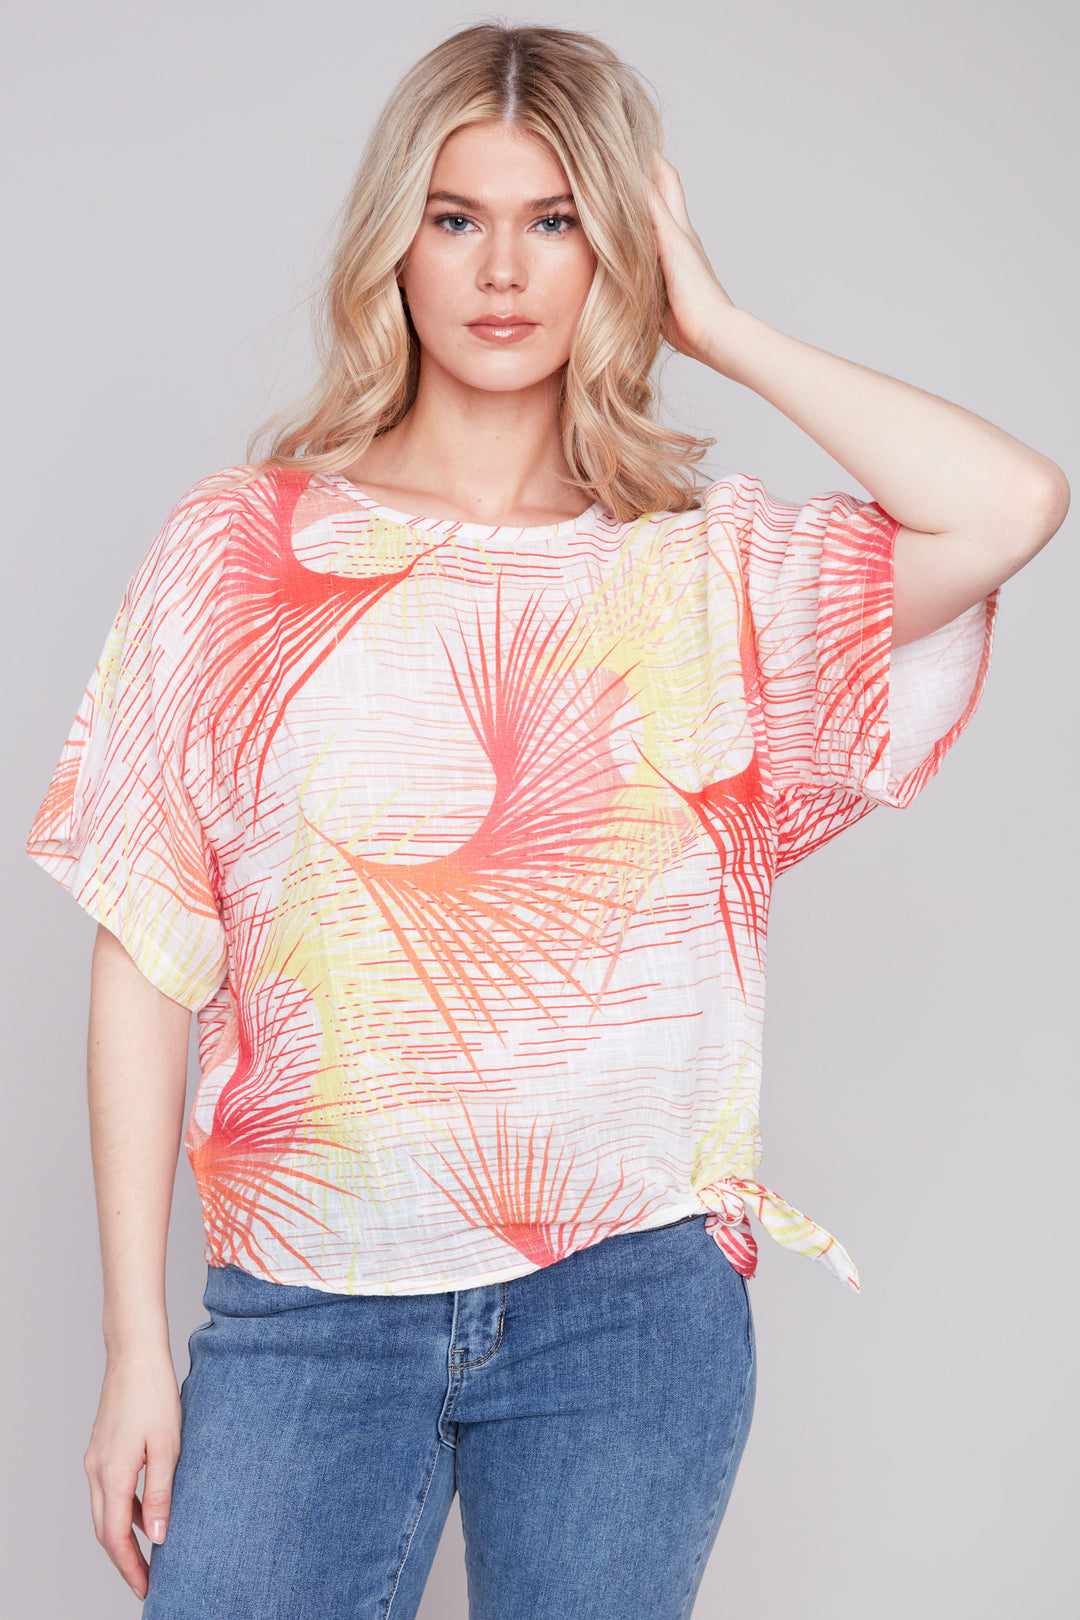 Charlie B Summer 2024 Made of soft, lightweight printed cotton gauze, this top features a neat palm print all-over and trendy dolman sleeves.